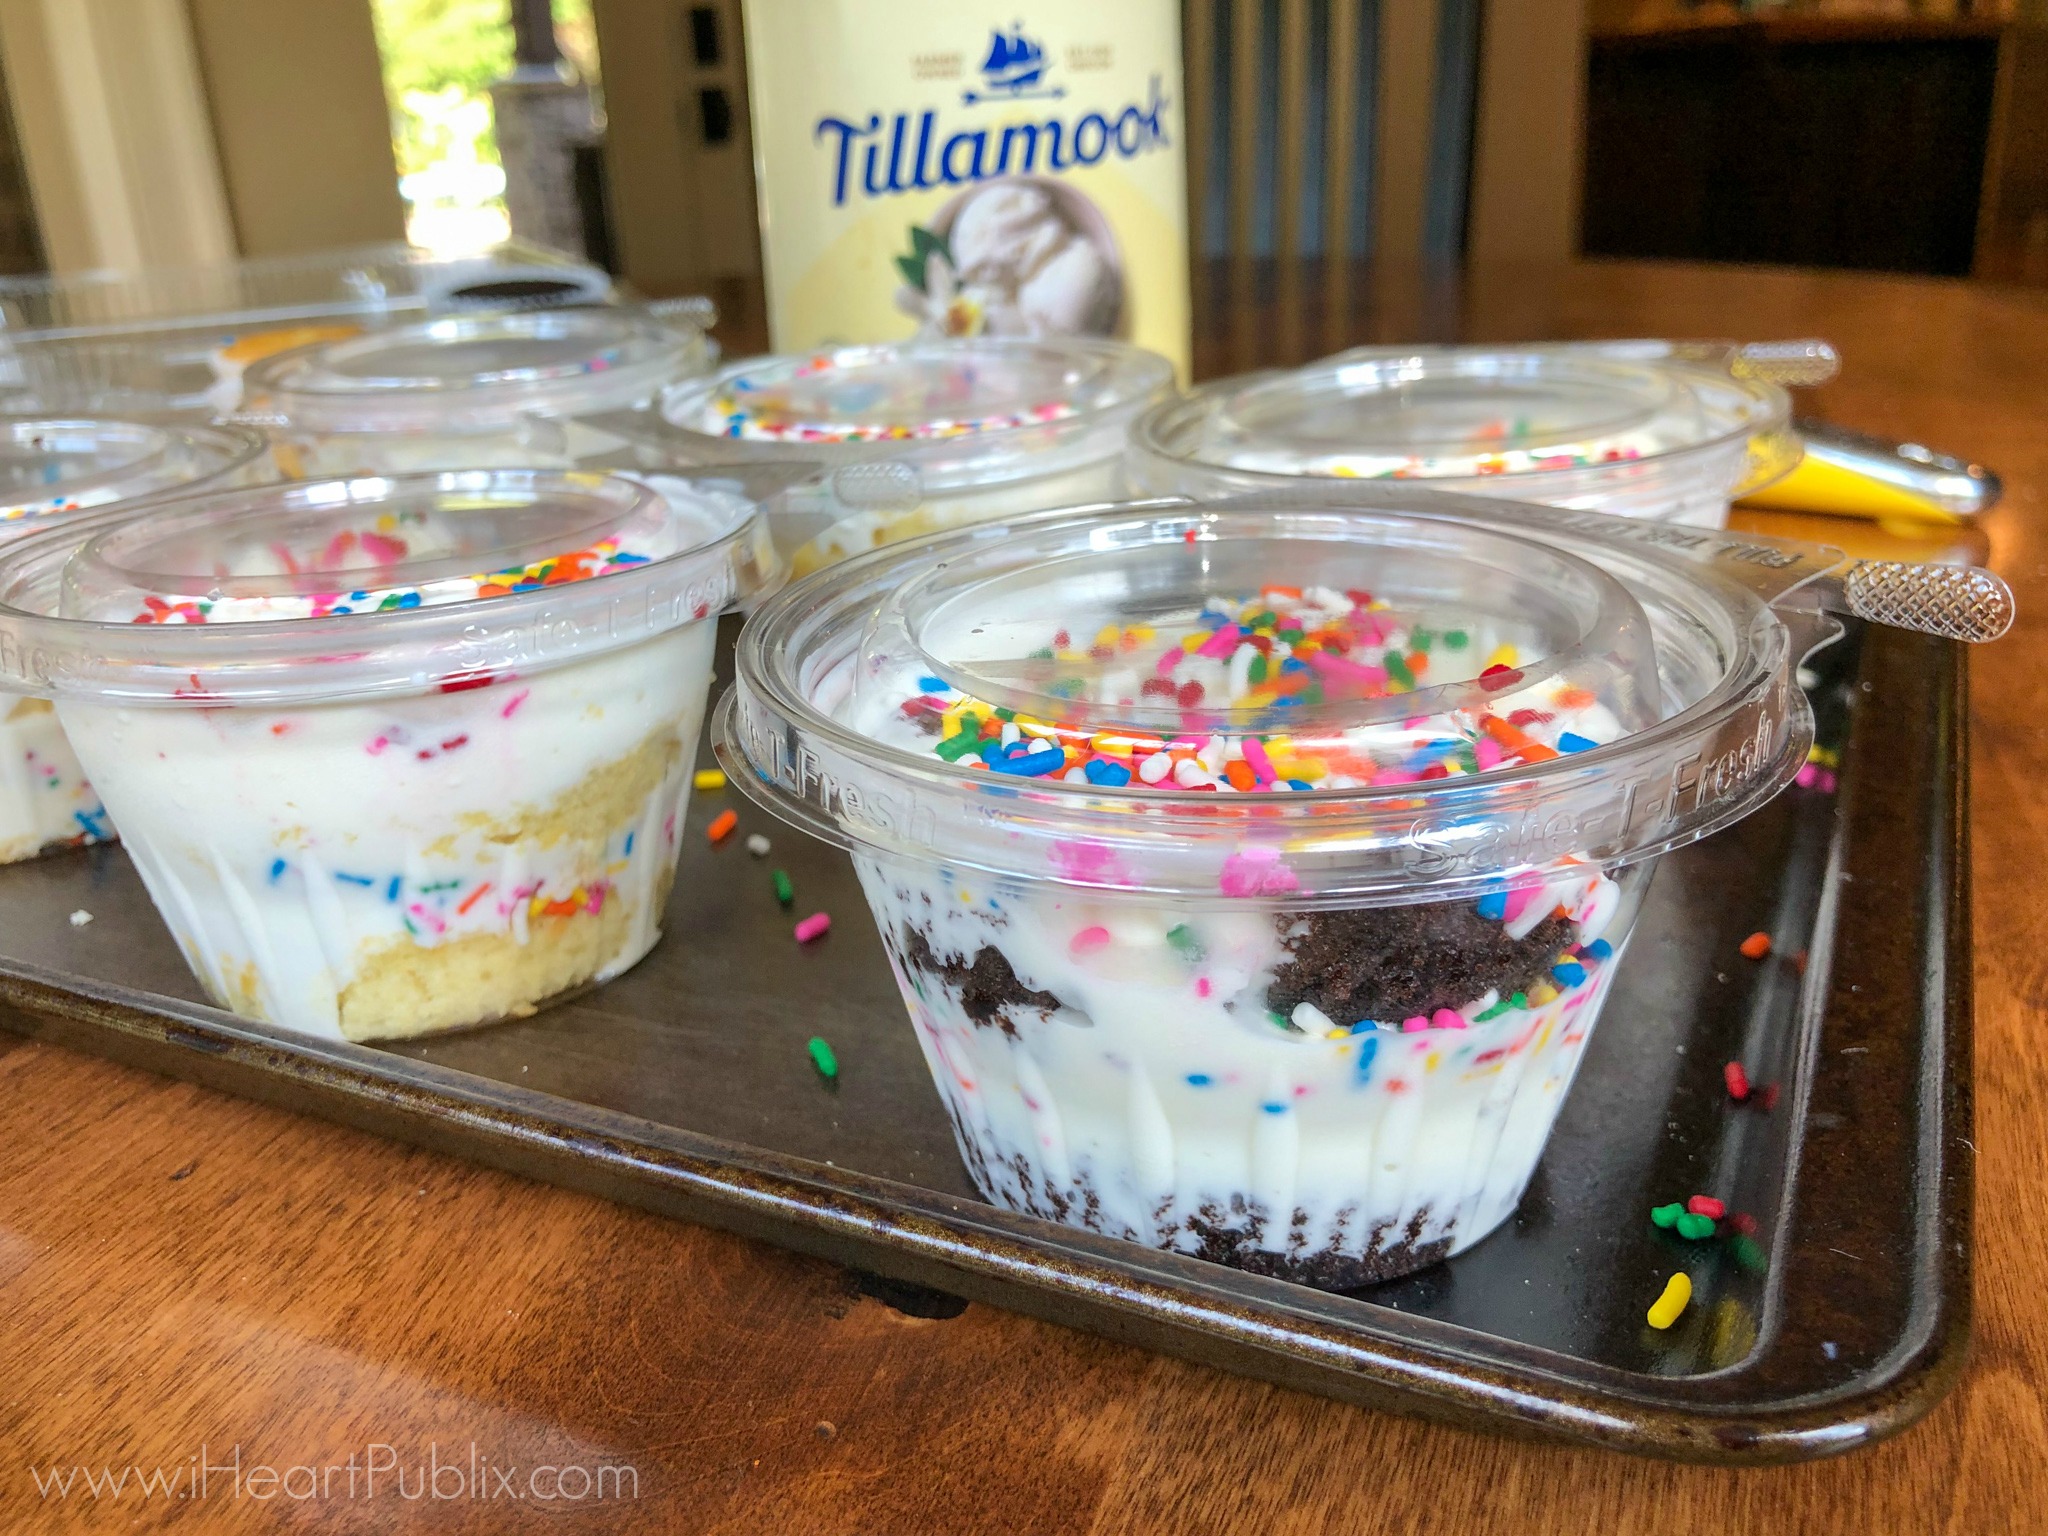 Tillamook S'mores Sundae Stack - Save On Delicious Ice Cream At Publix on I Heart Publix